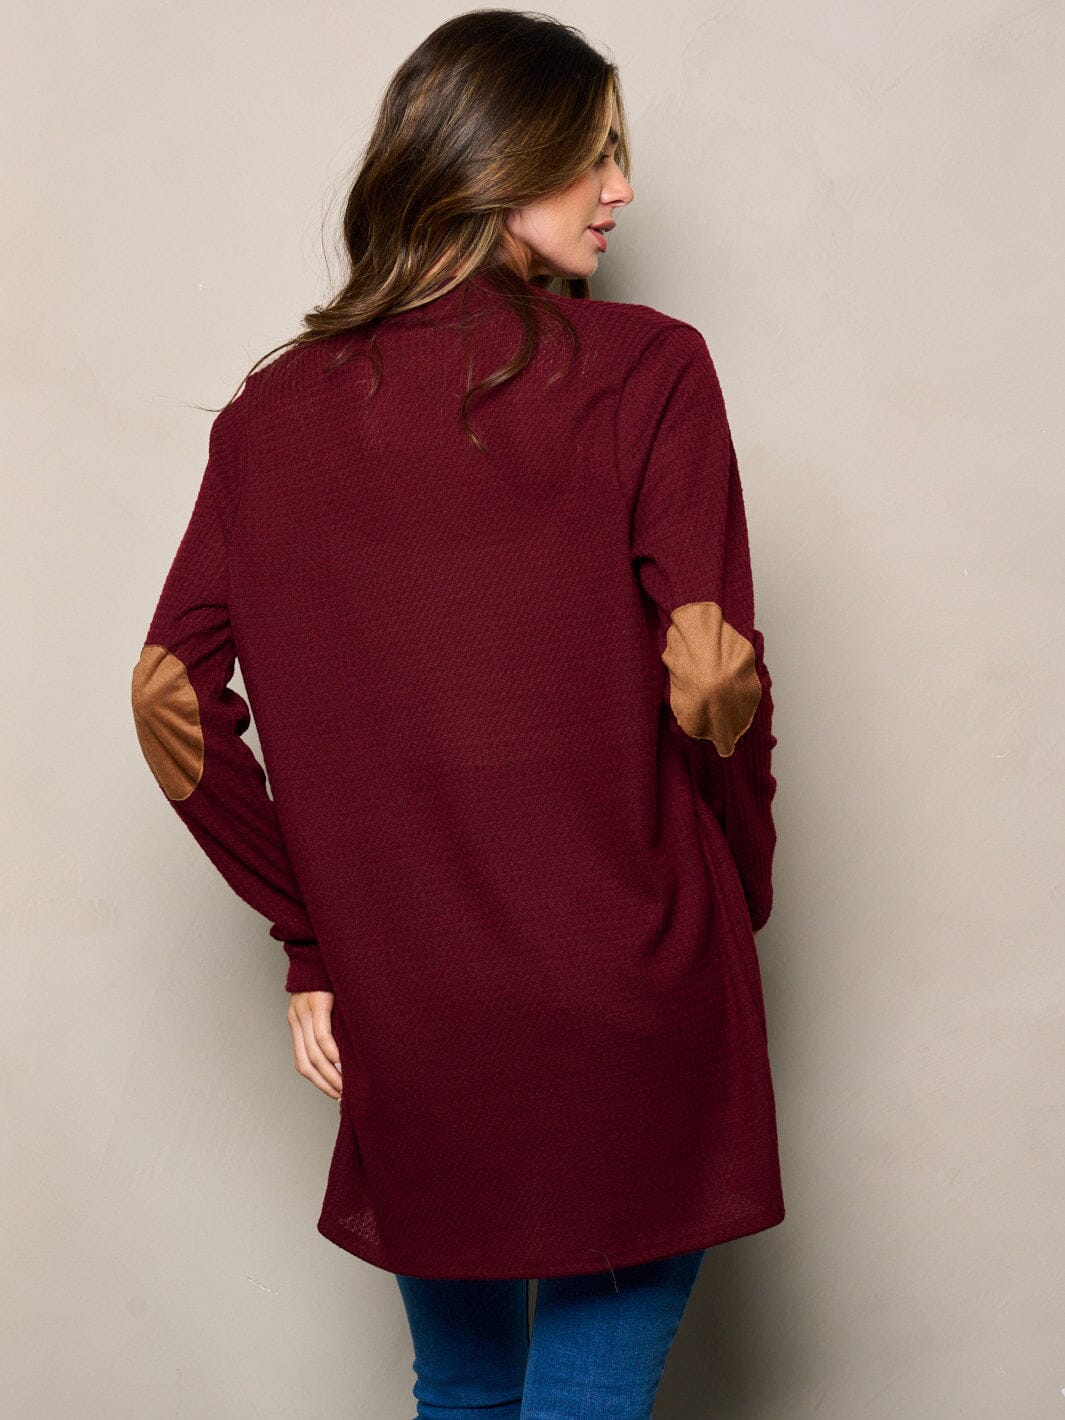 Elbow Patched Waffle Cardigan in Burgundy back view.